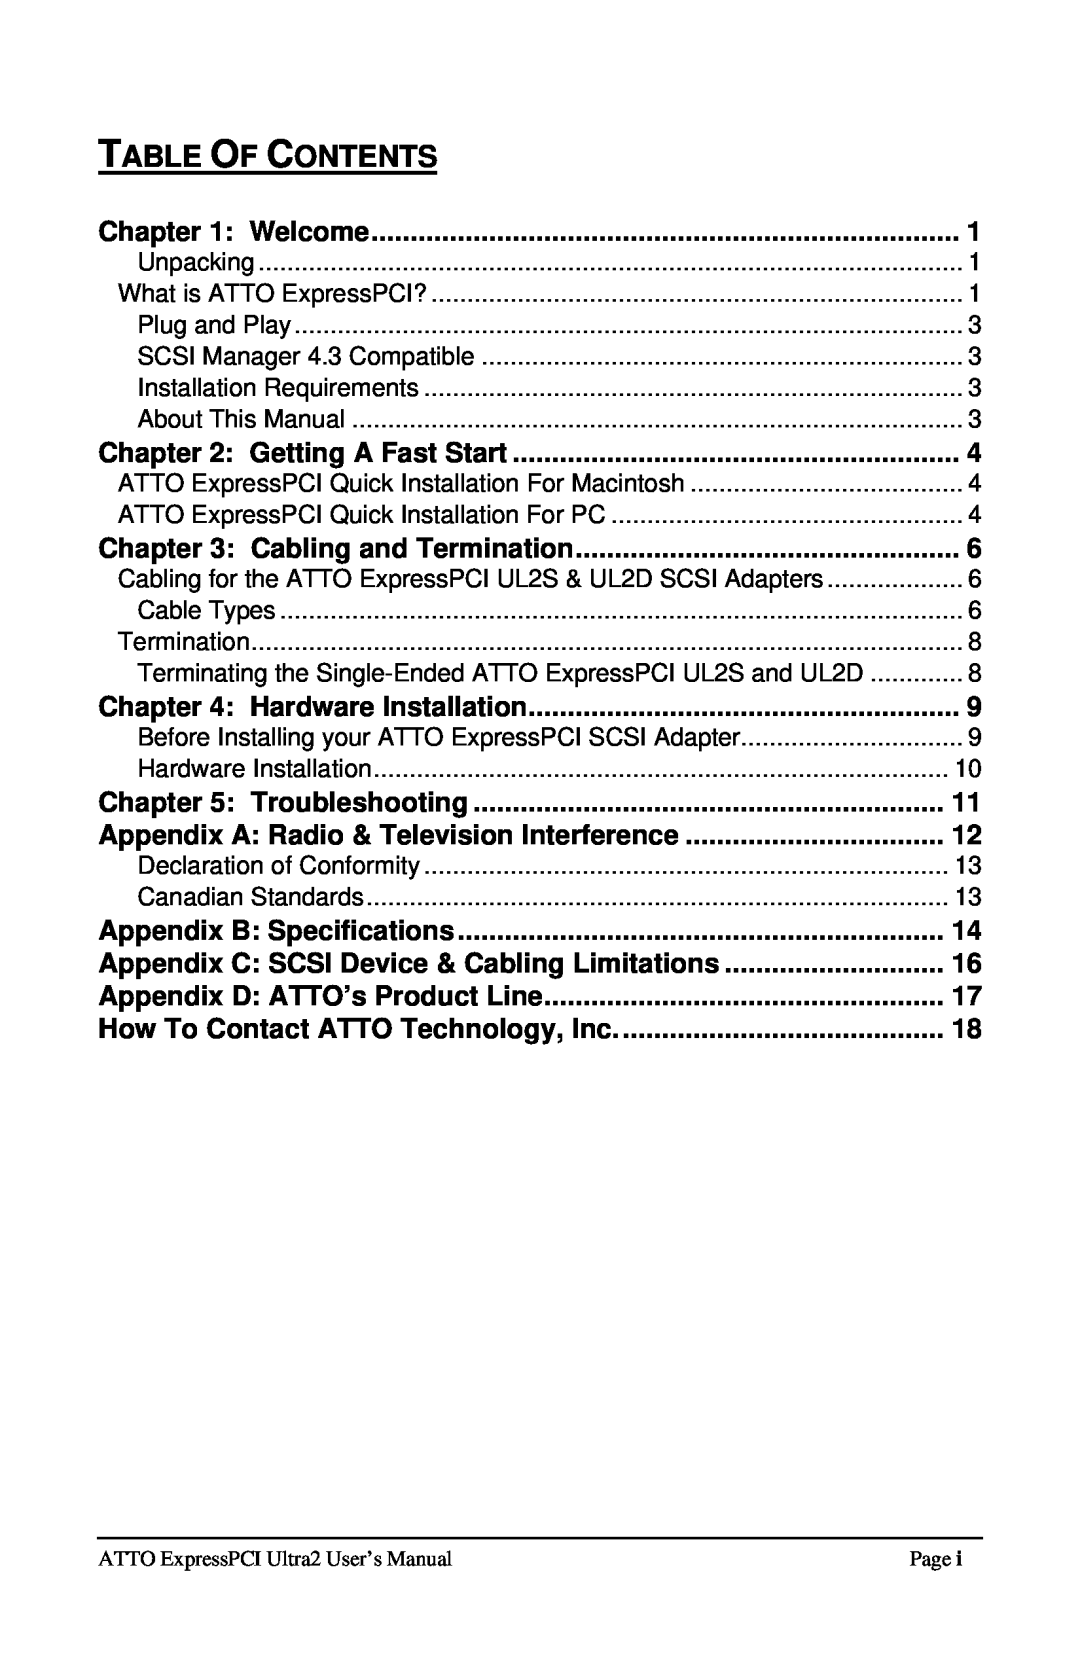 ATTO Technology UL25, UL2D Table Of Contents, Troubleshooting, Appendix C SCSI Device & Cabling Limitations, Welcome 